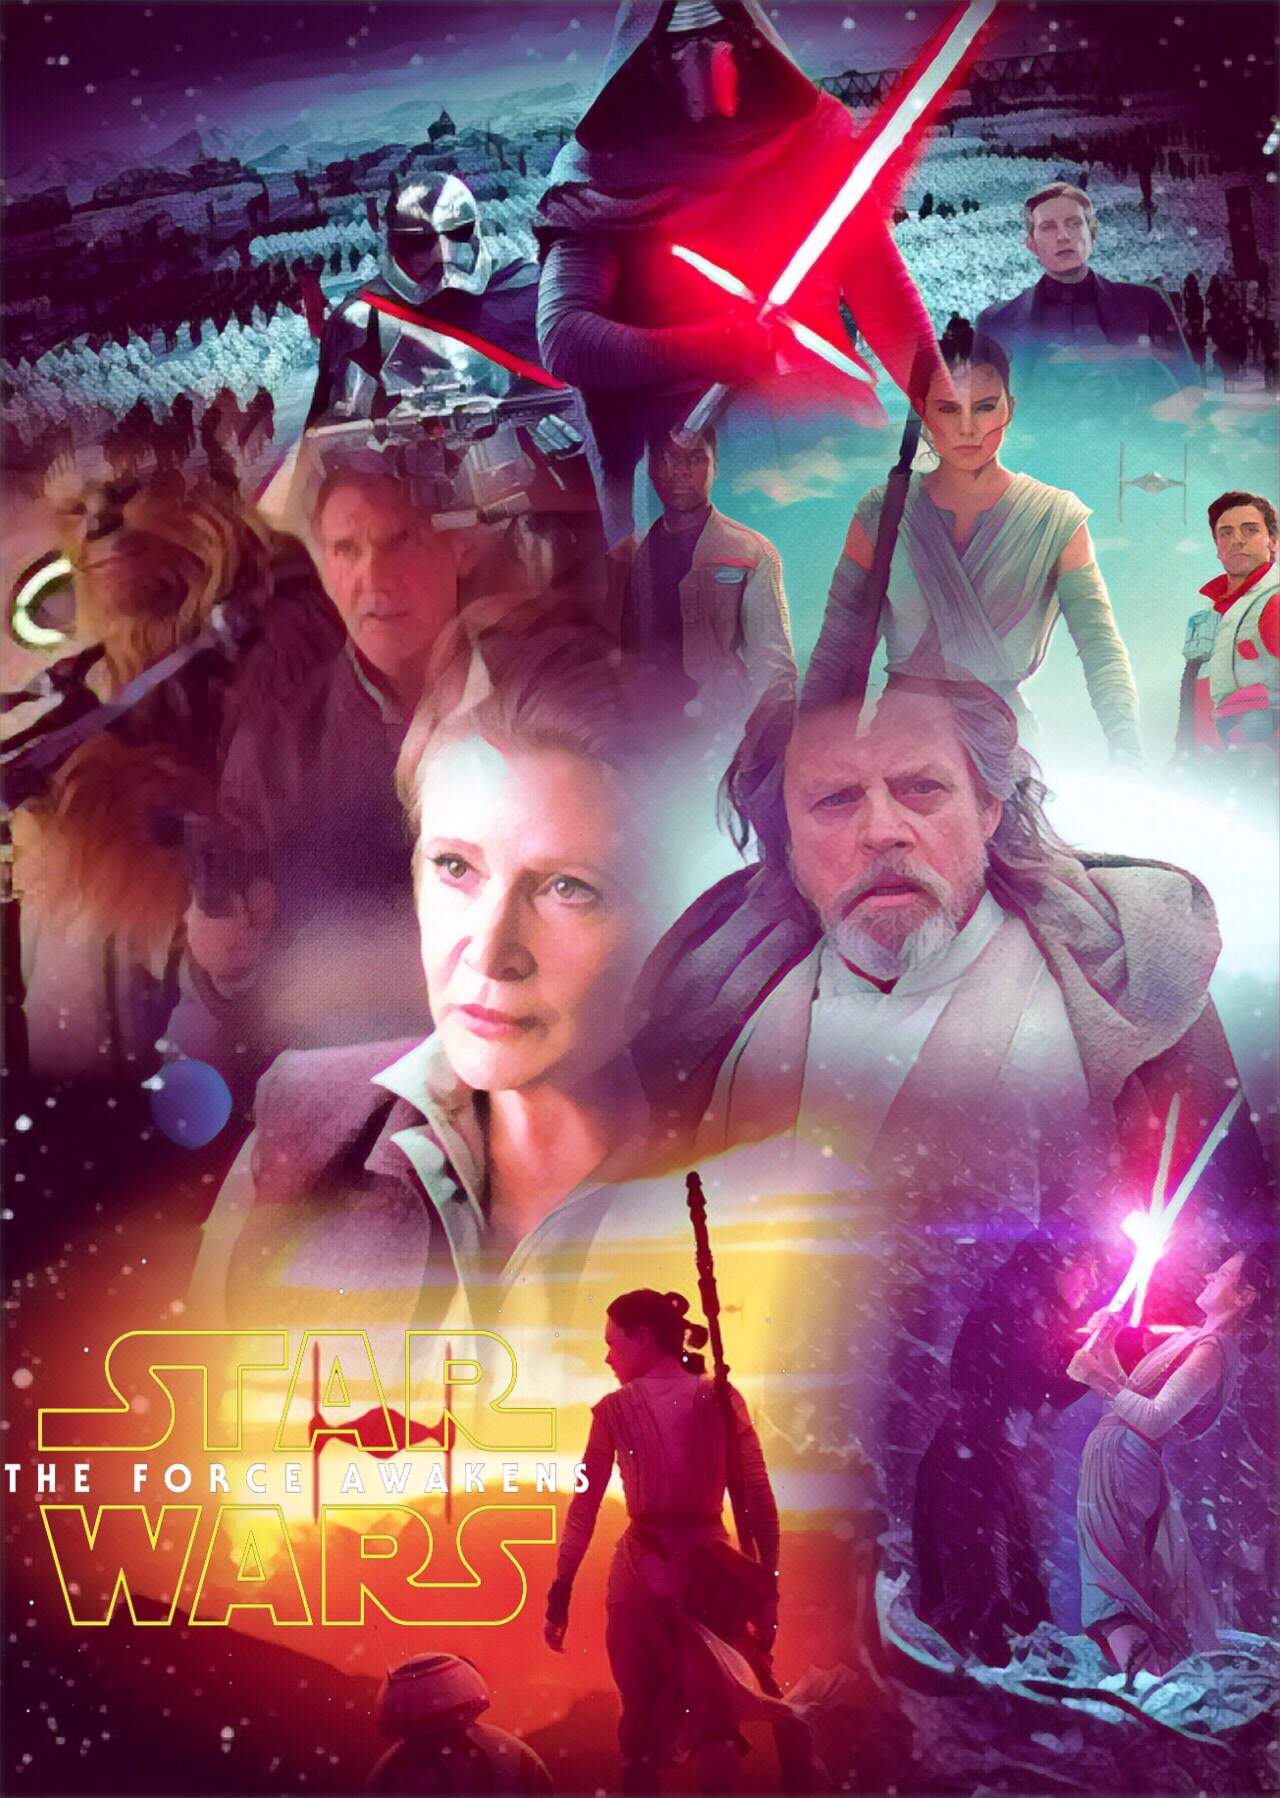 chinese force awakens poster